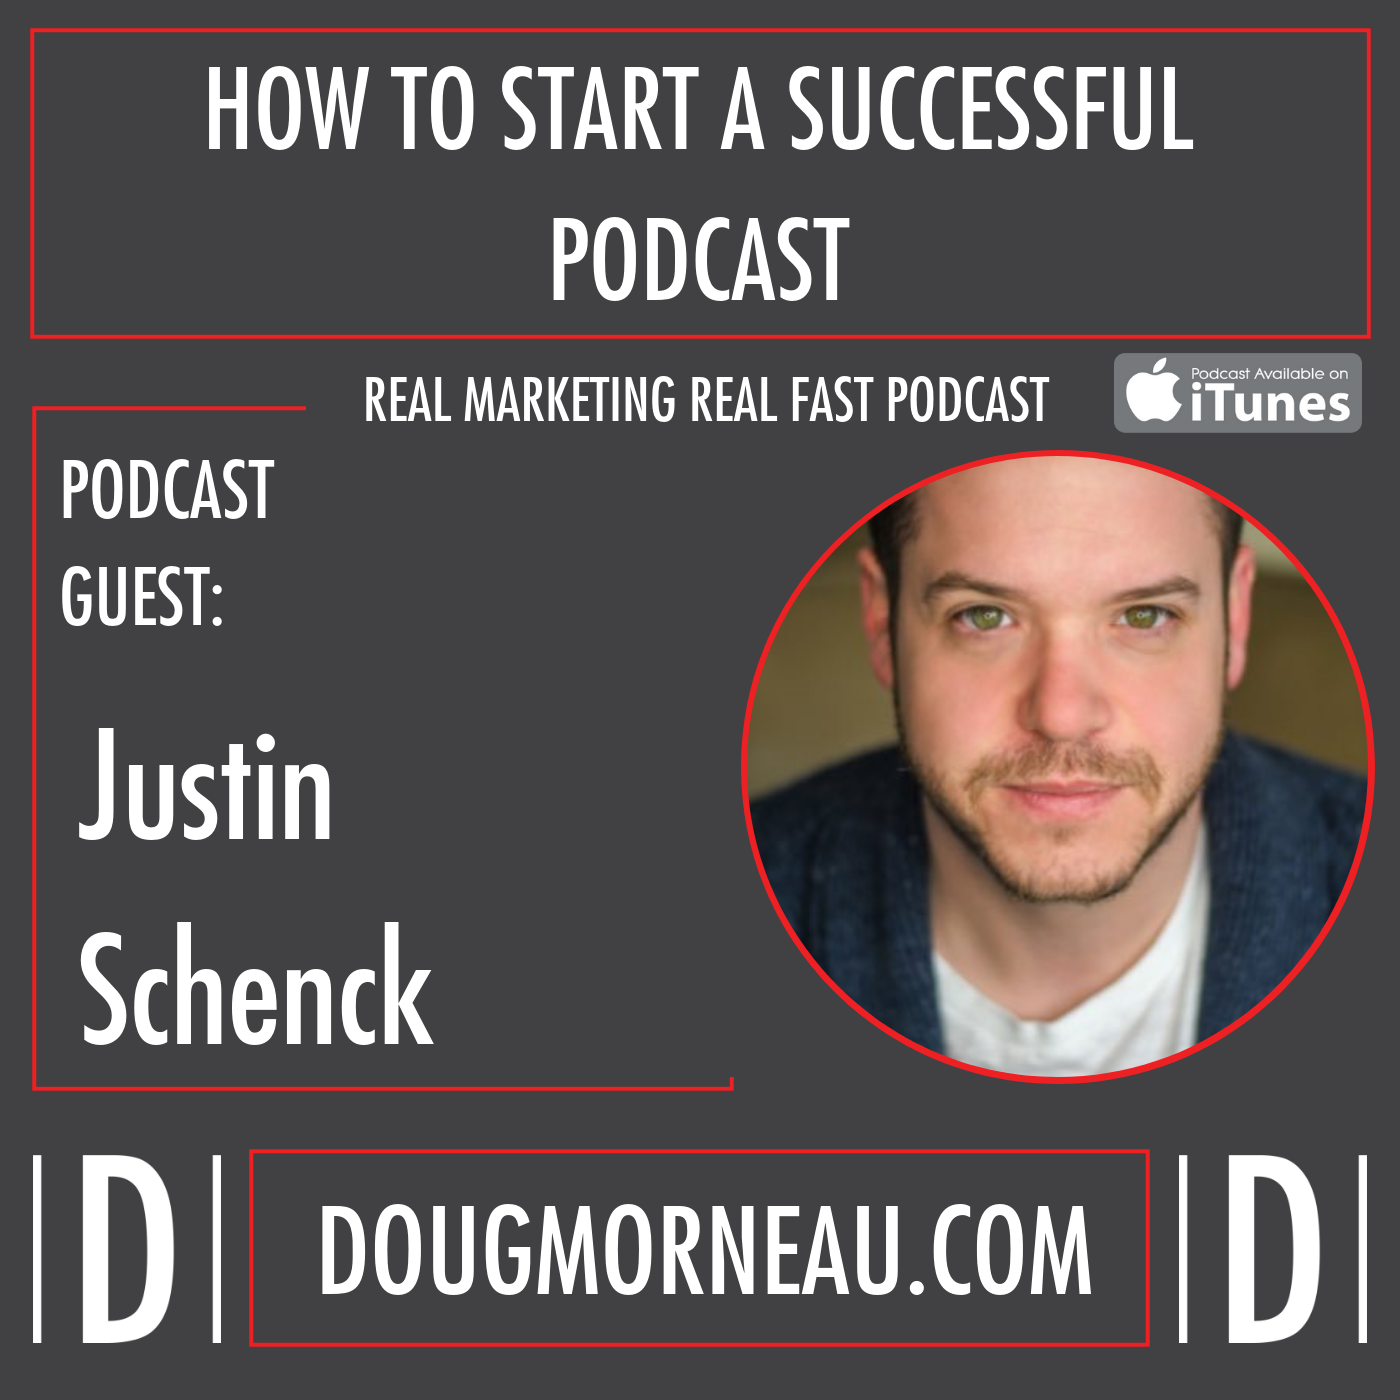 HOW TO START A SUCCESSFUL PODCAST JUSTIN SCHENCK - DOUG MORNEAU - REAL MARKETING REAL FAST PODCAST